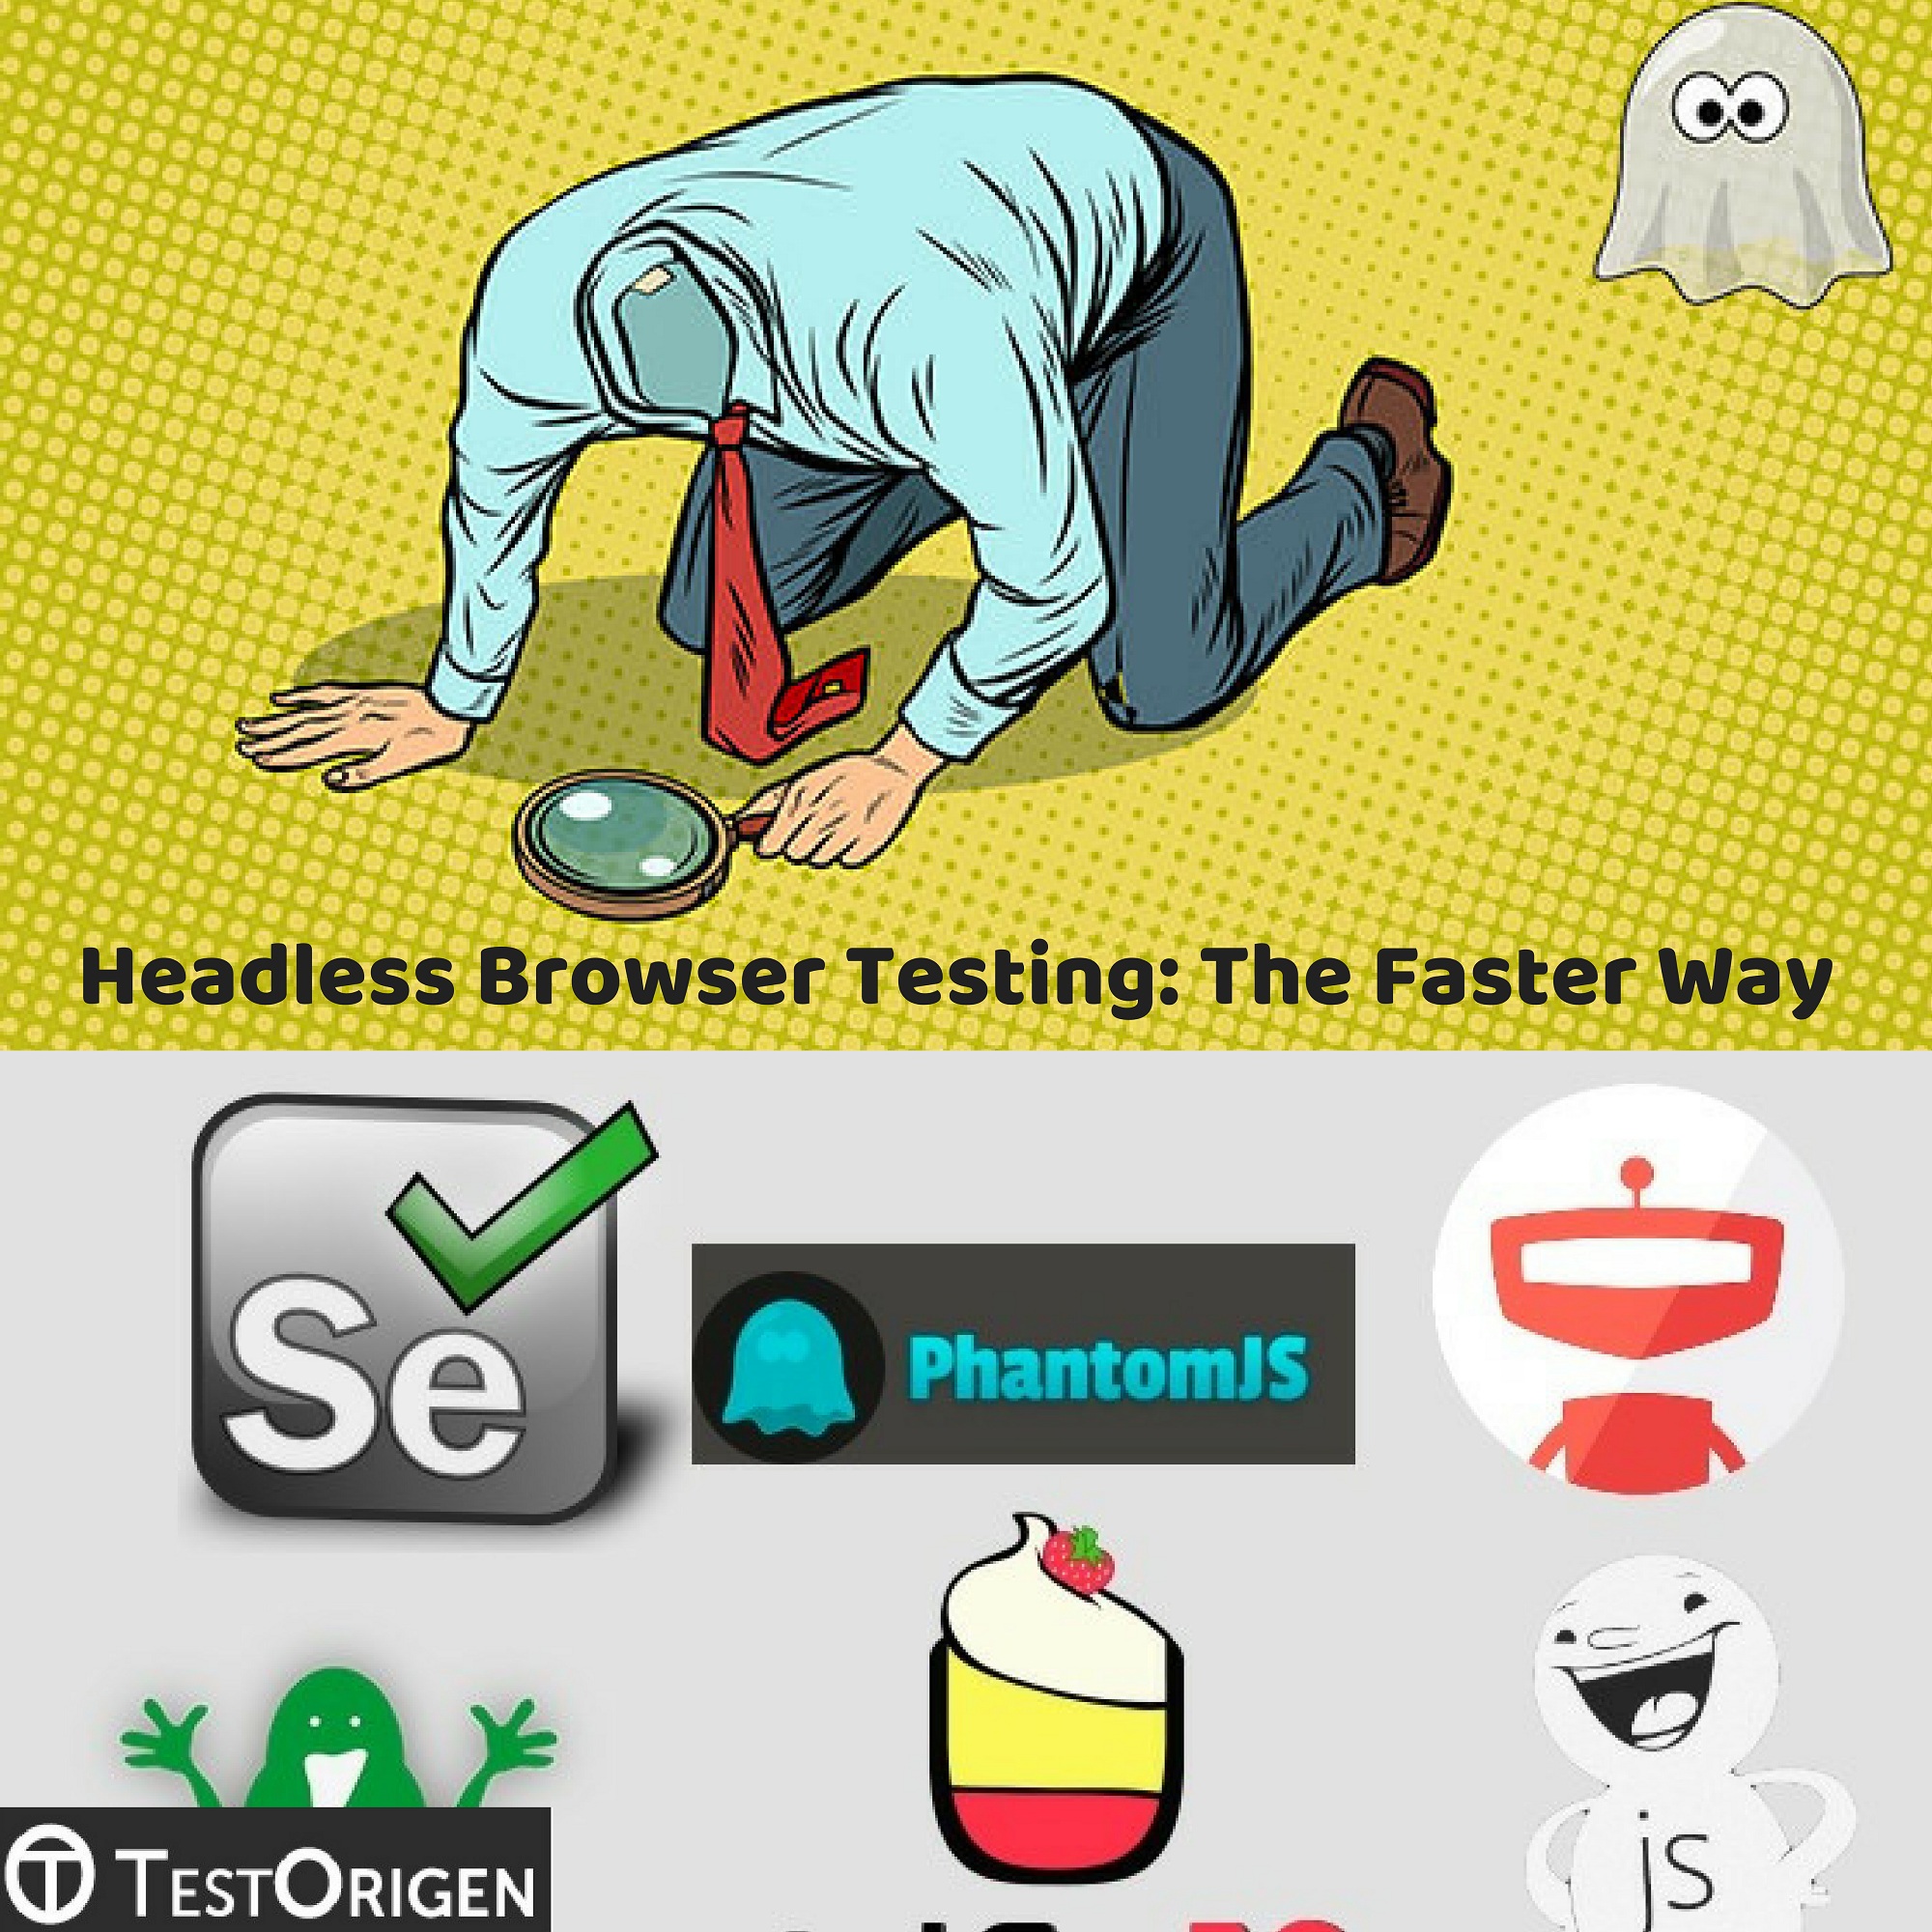 Headless Browser Testing: The Faster Way